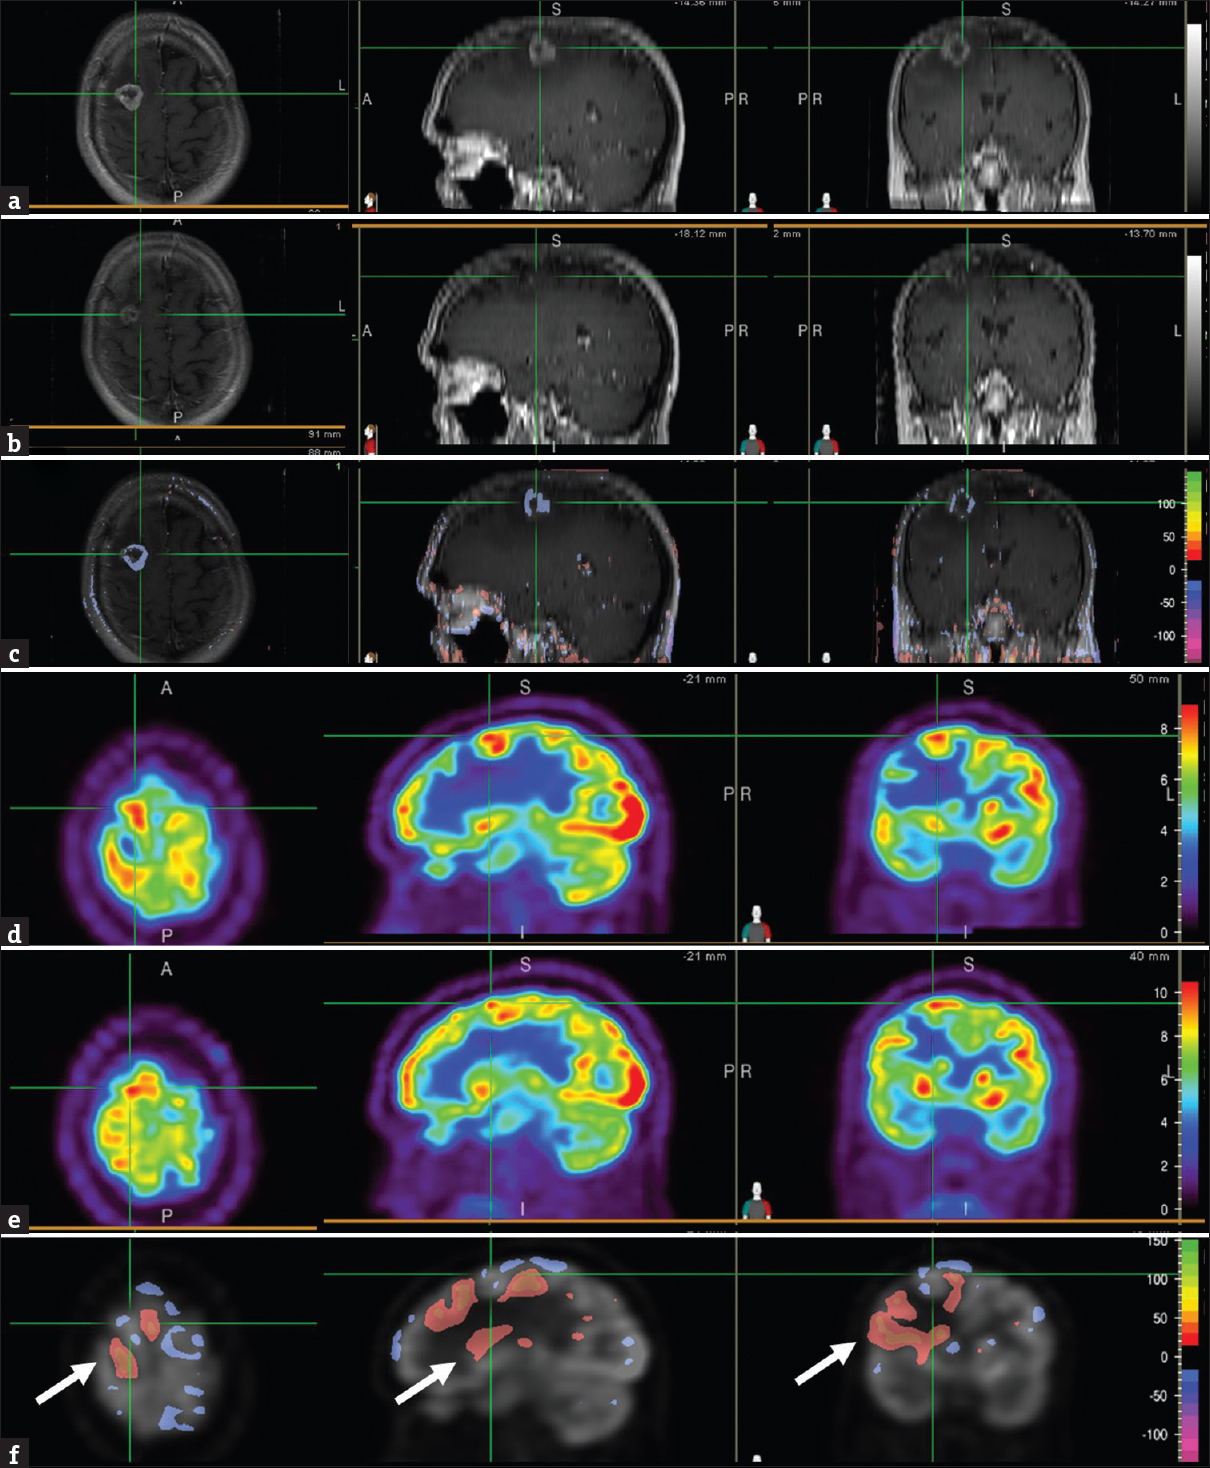 Brain magnetic resonance images, T1-weighted contrast-enhanced, at 1 month (a) and 7 months (b) after stereotactic radiosurgery showed the area of the right frontal brain lesion (cross-hair). Normalized subtraction result of A and B, overlaid with the magnetic resonance image (c), showed marked decrease in the signal intensity and size of the ring enhancement. Corresponding positron emission tomography images at 1 month (d) and 7 months (e) after stereotactic radiosurgery showed the area of the right frontal lesion (cross-hair). Normalized subtraction result overlaid with positron emission tomography image (f) demonstrated small areas of mild interval decreased uptake (purple) within the brain lesion and other areas with no interval change. Given the residual fludeoxyglucose avidity compared to the surrounding and contralateral brain parenchyma, residual tumor was suspected. Interval increased (orange-red) uptake in brain tissue surrounding the tumor lesion reflected metabolic recovery and improving vasogenic edema (F, arrow).